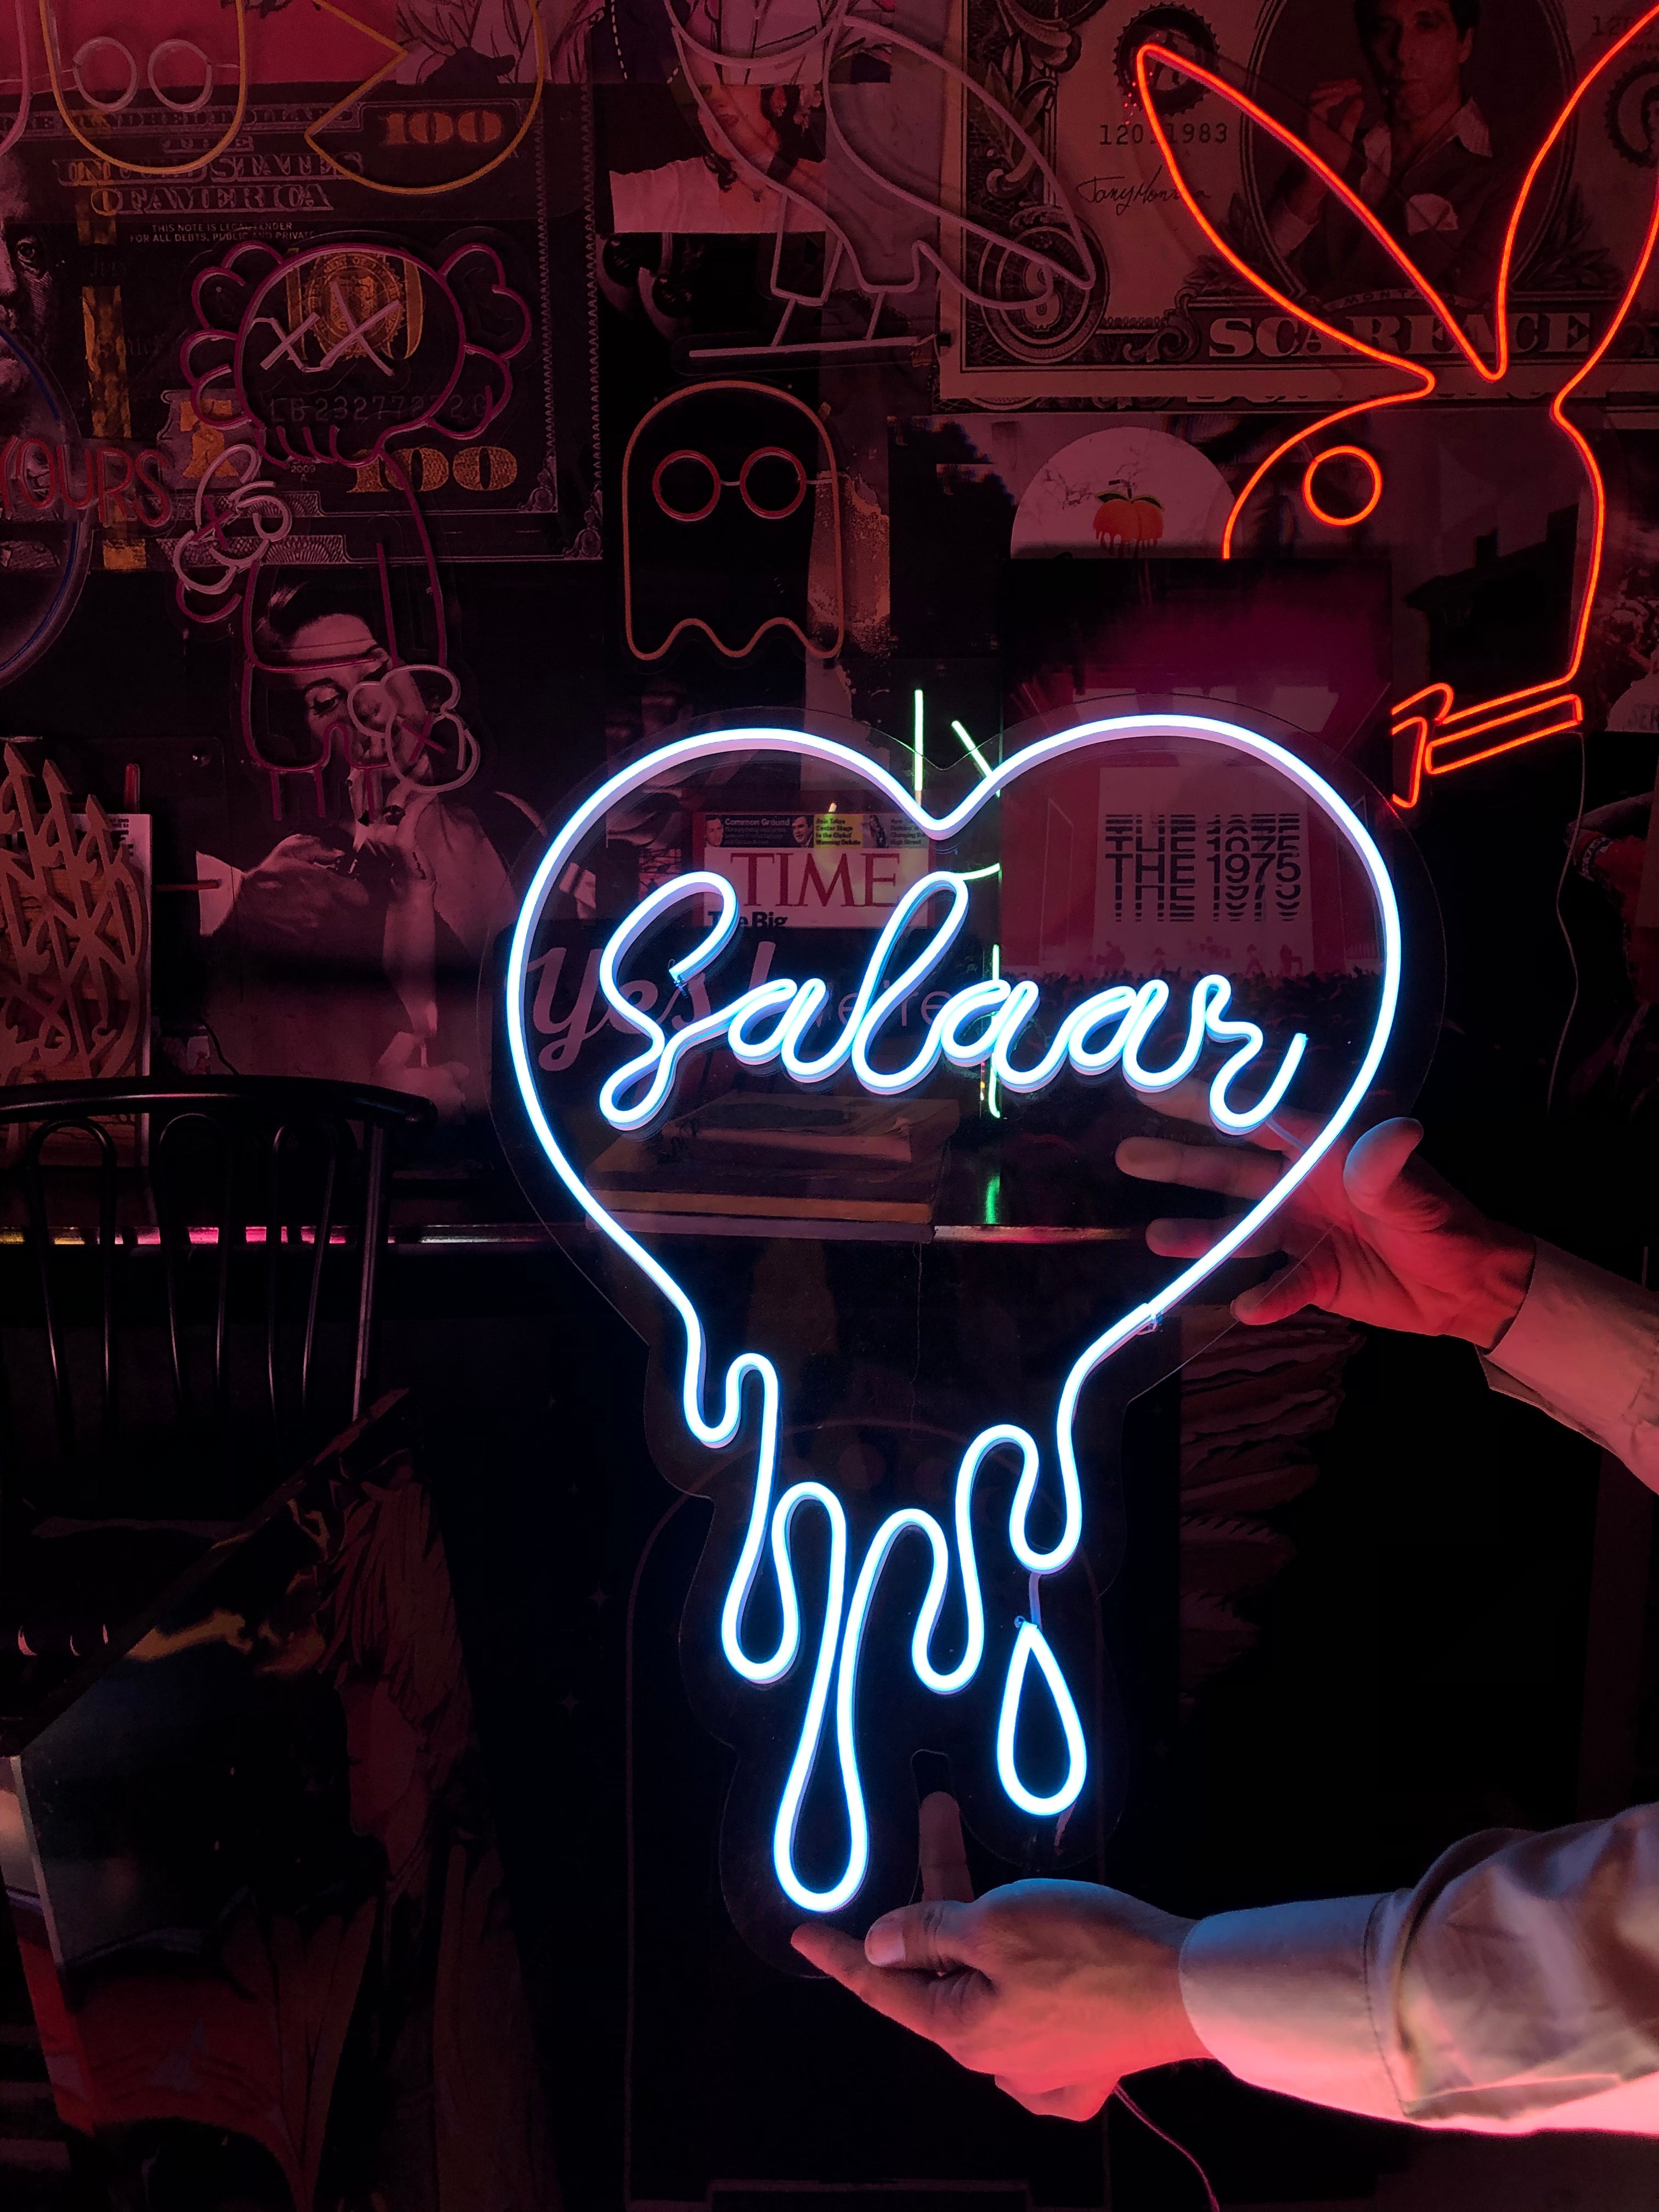 dripping heart (with name)  Neon Sign